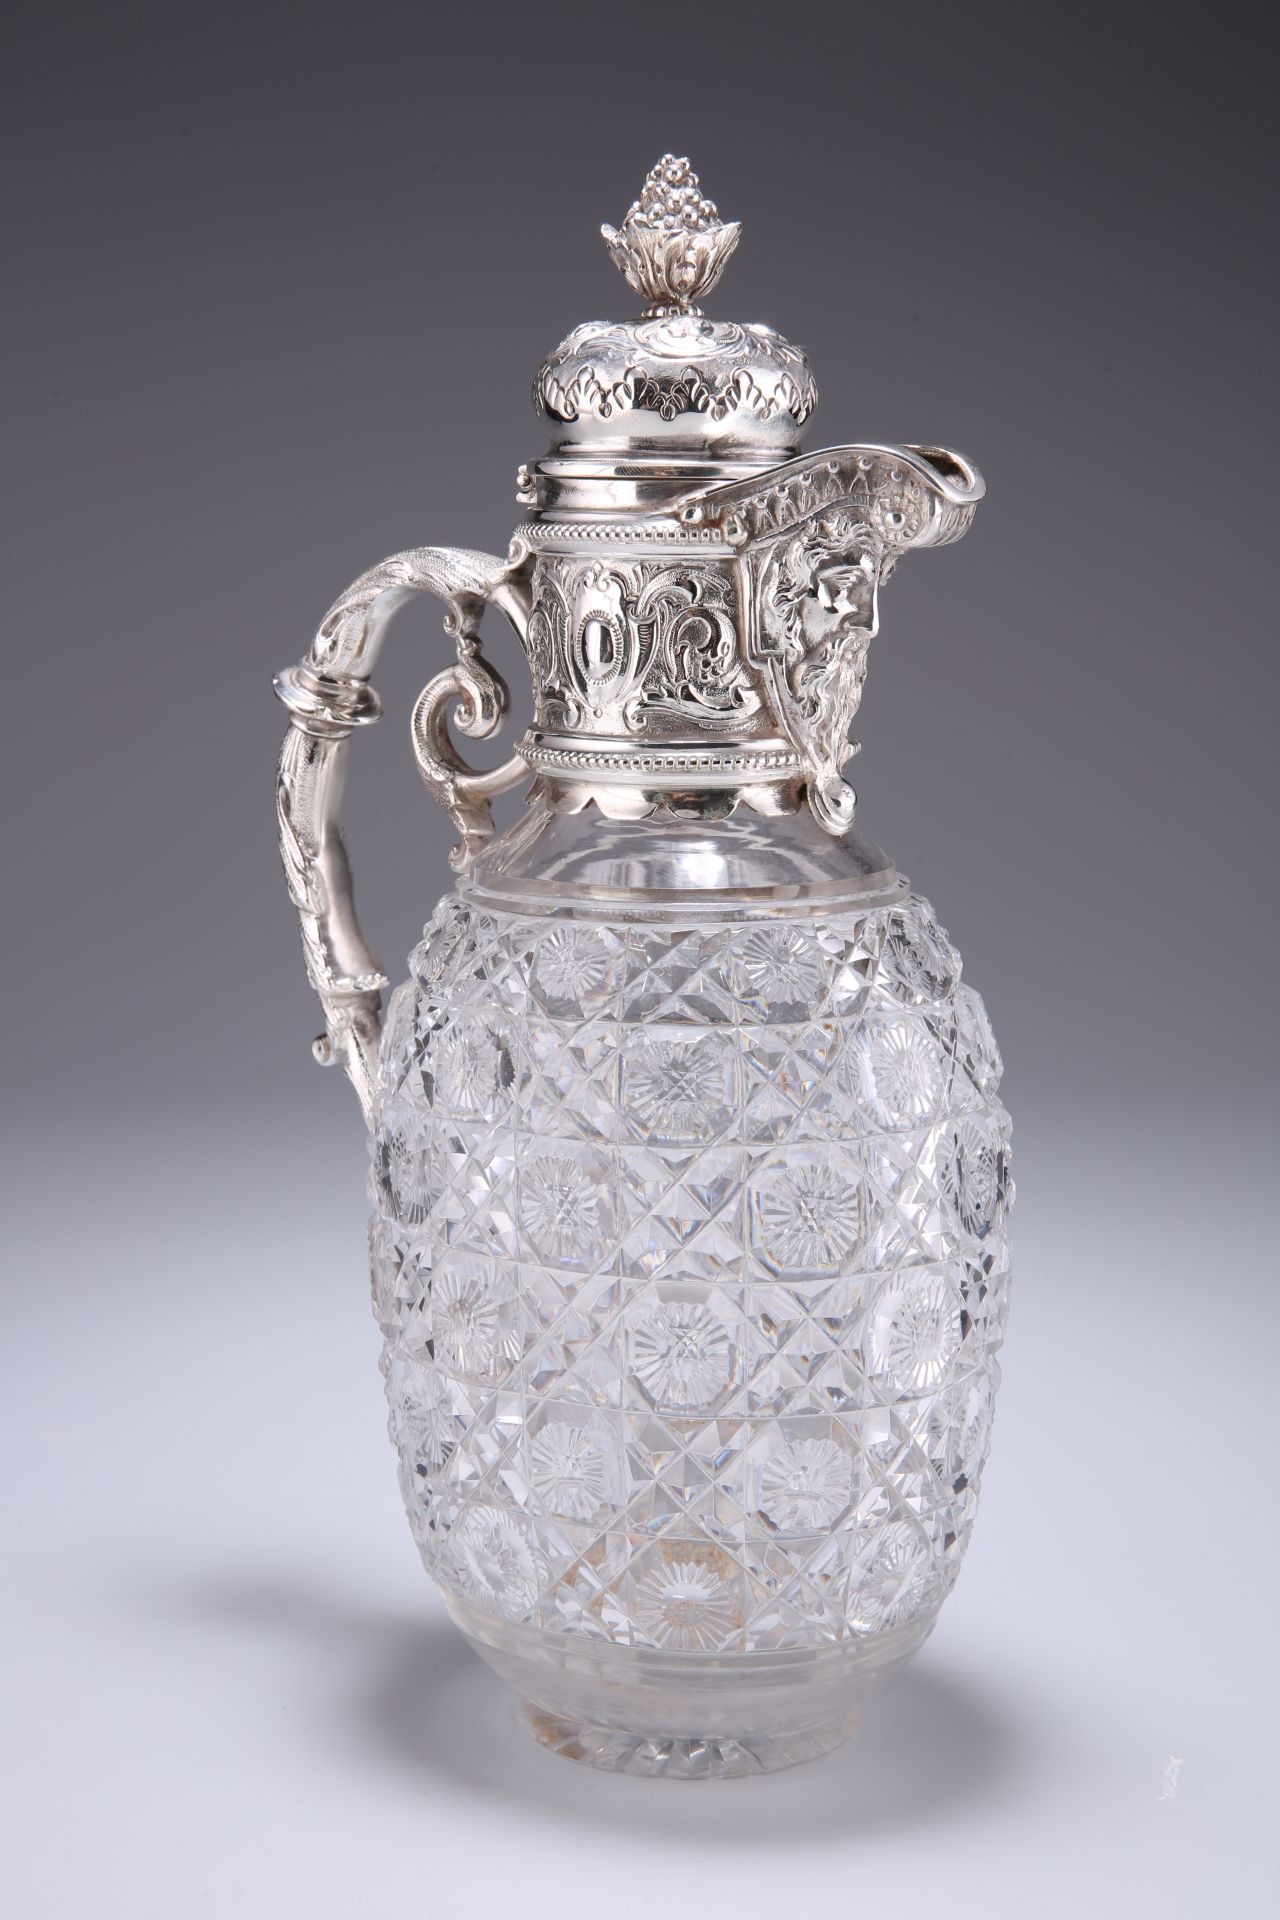 A SILVER-PLATE MOUNTED CUT-GLASS CLARET JUG - Image 2 of 3